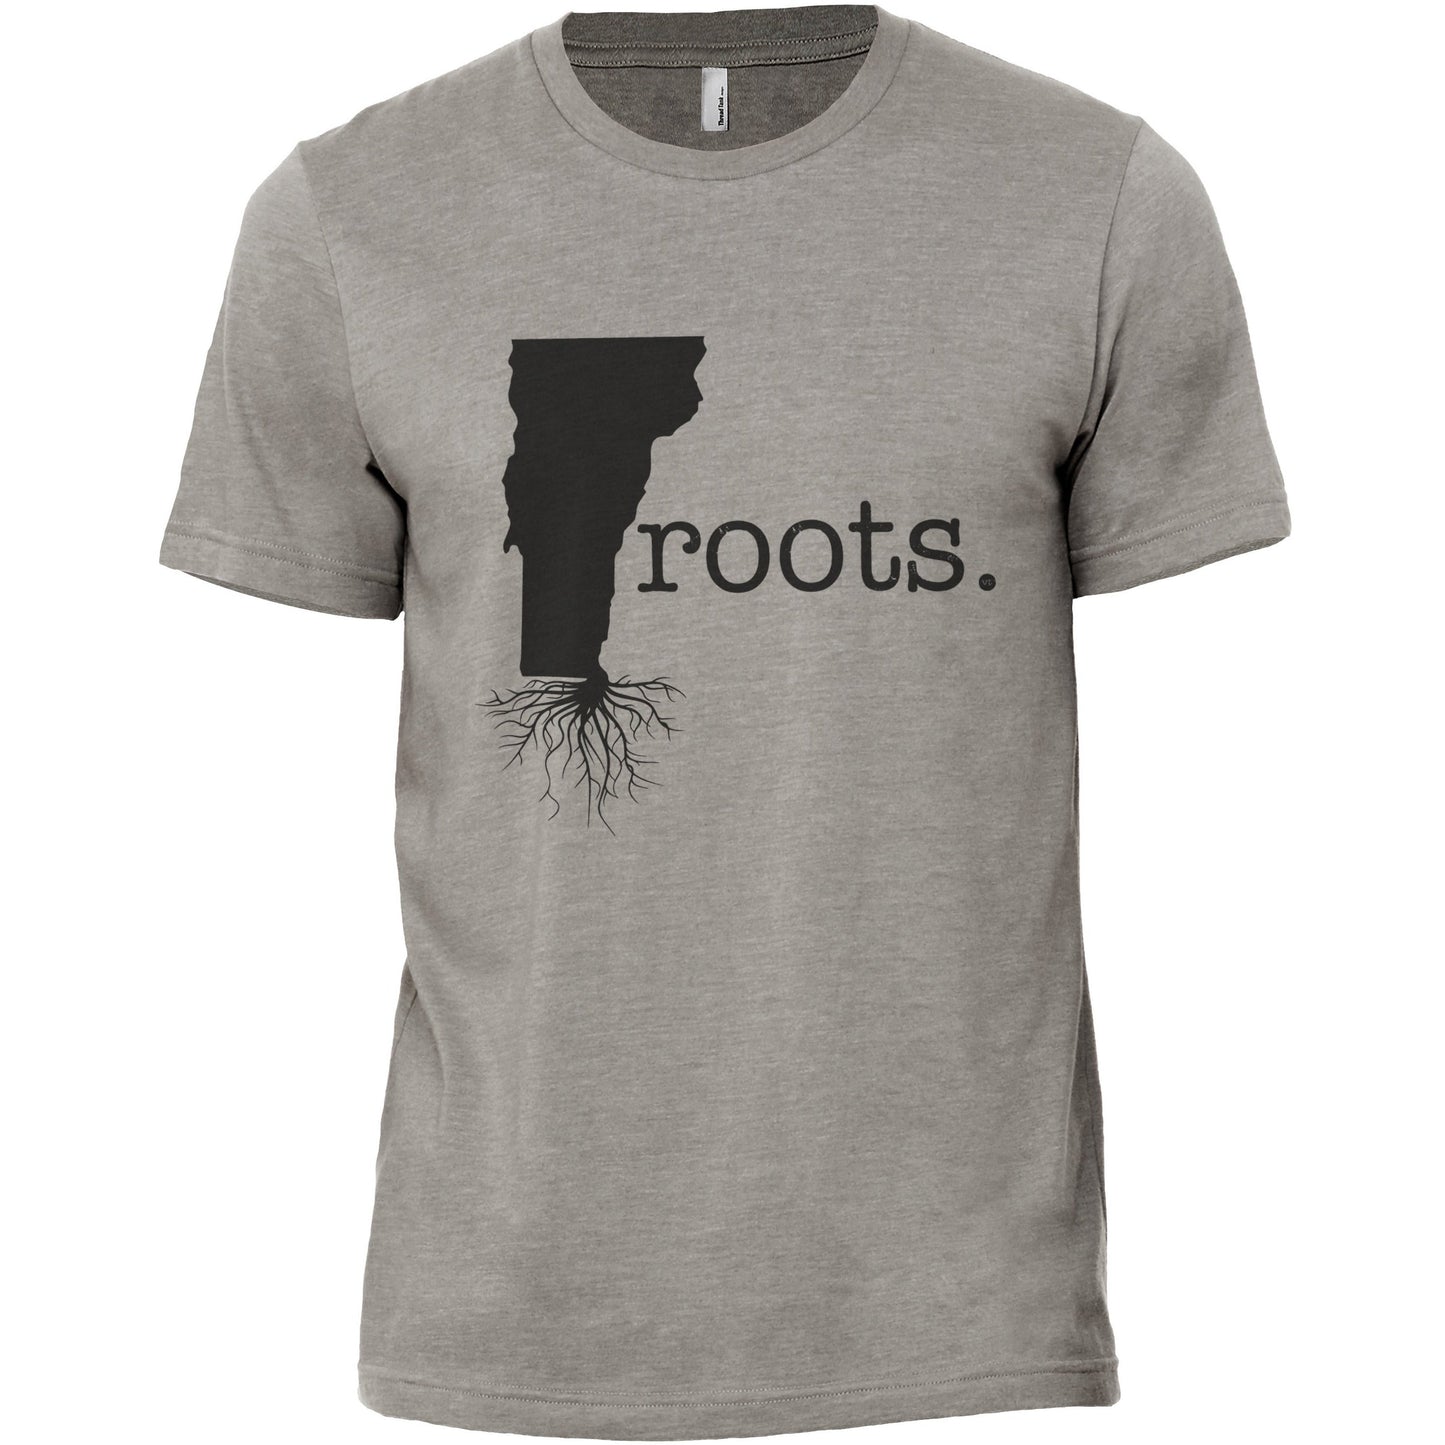 Roots Vermont VT - Stories You Can Wear